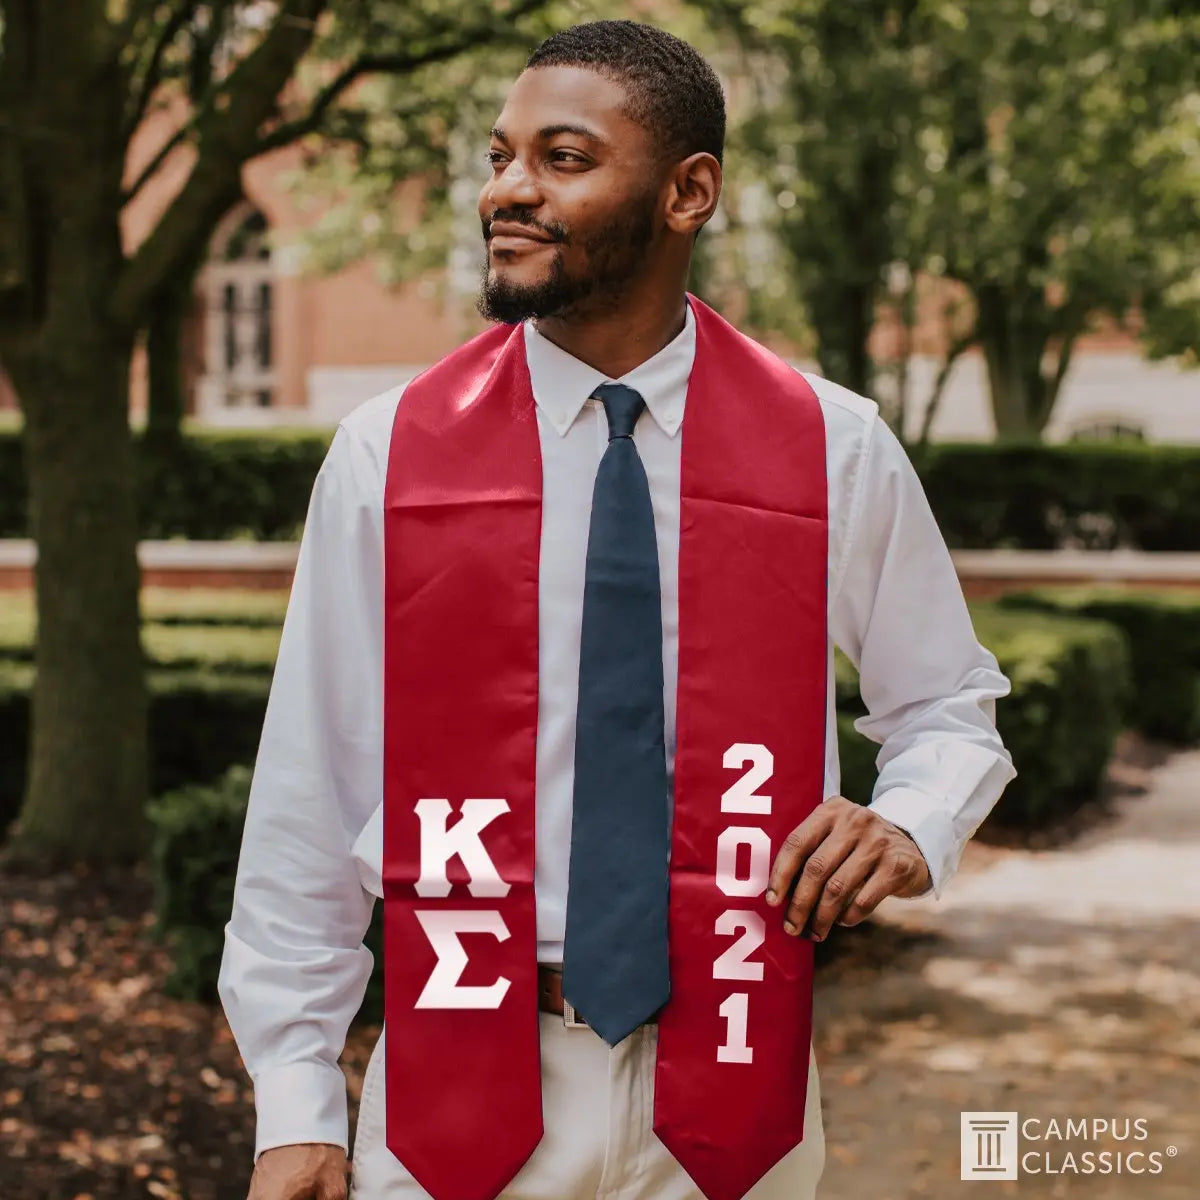 Kappa Sig Pick Your Own Colors Graduation Stole - Kappa Sigma Official Store